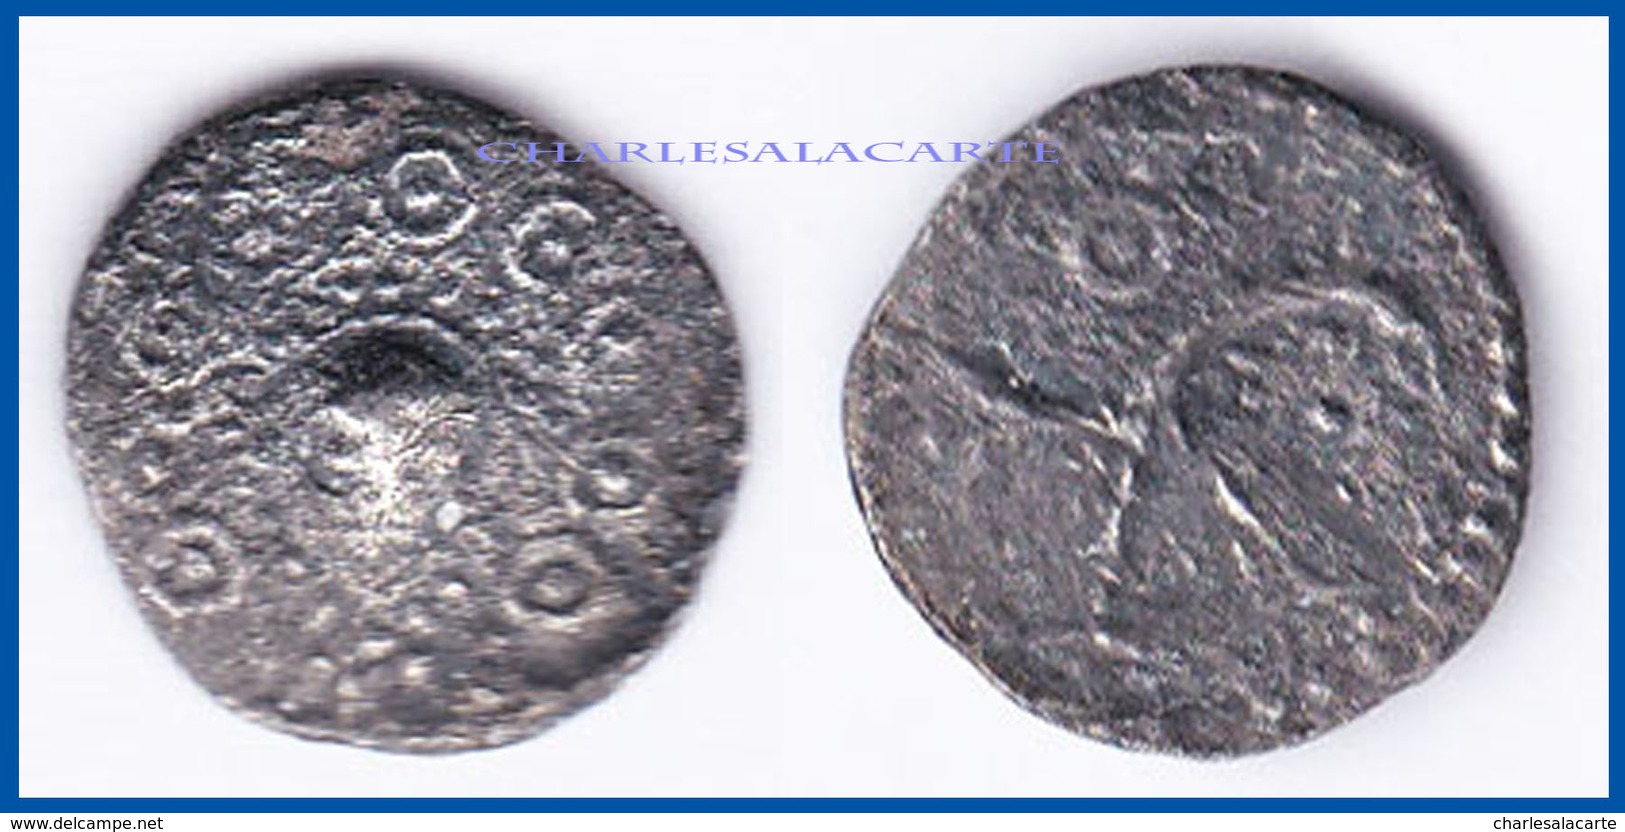 GREAT BRITAIN C.710-760 SILVER SCEAT  SERIES H  TYPE 49  FINE CONDITION - …-1066 : Celtic / Anglo-Saxon